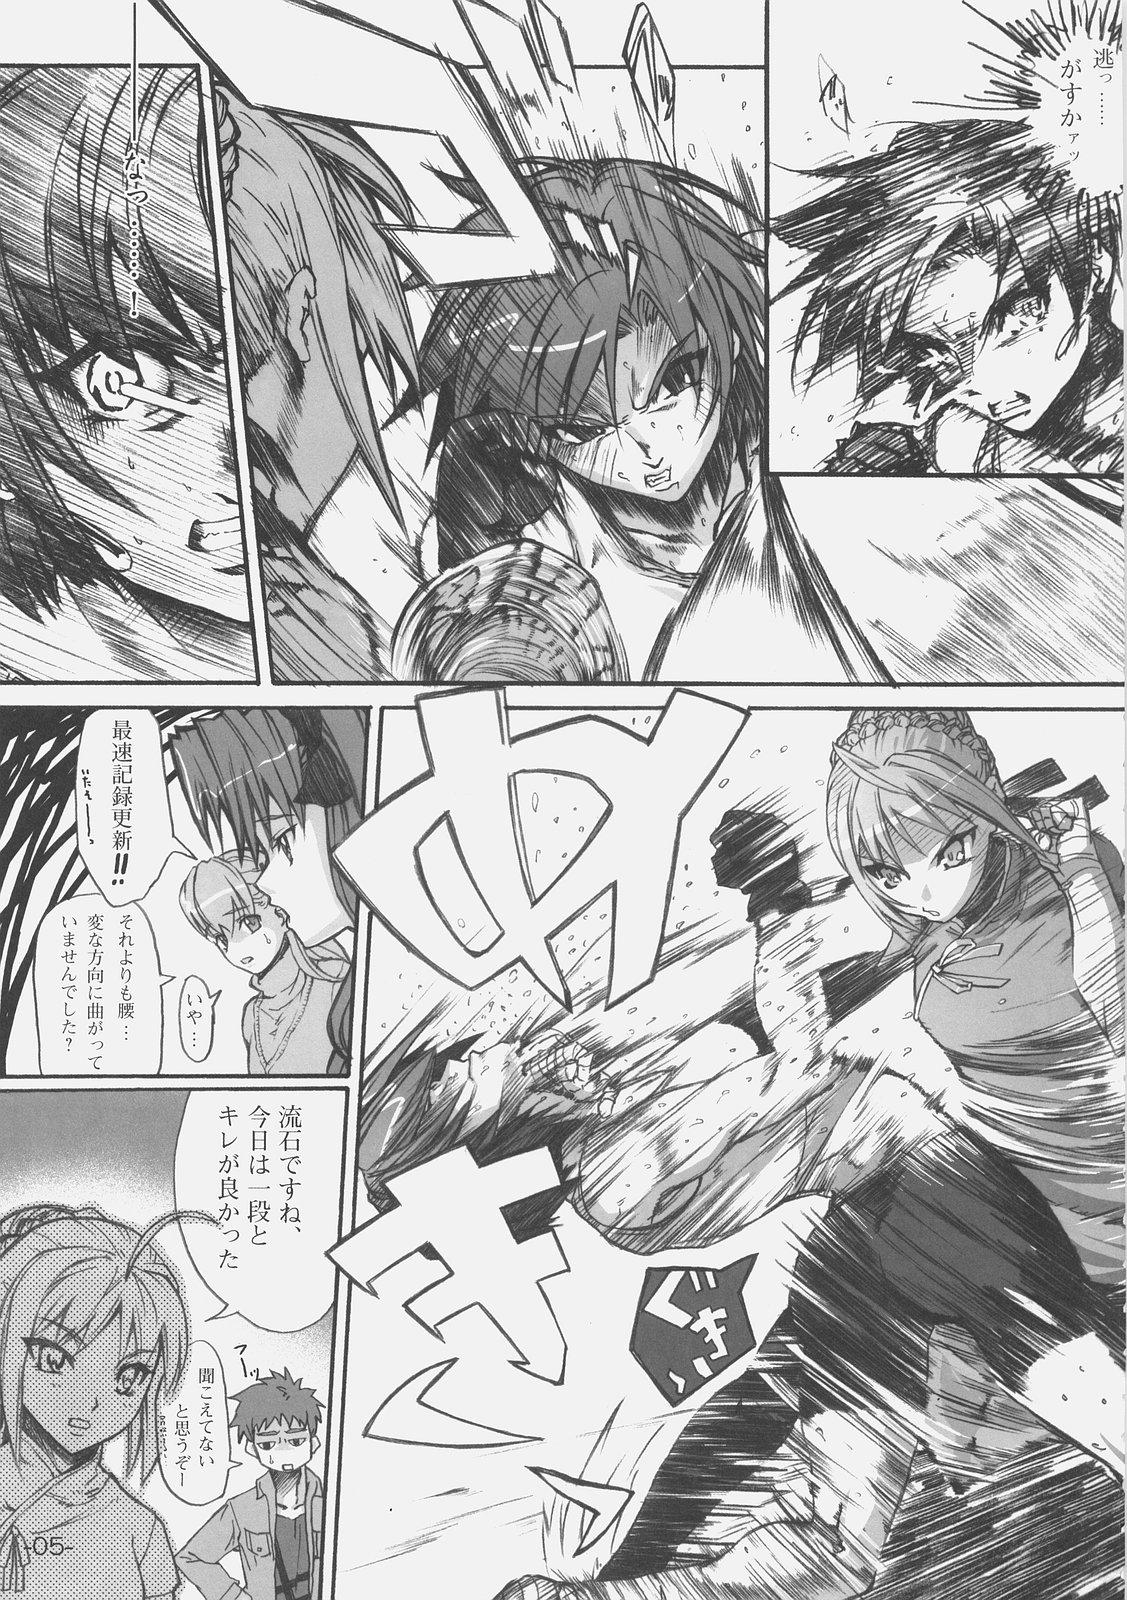 Fuck FIRSTBLOOD - Fate stay night Fate hollow ataraxia Free Hardcore Porn - Page 7